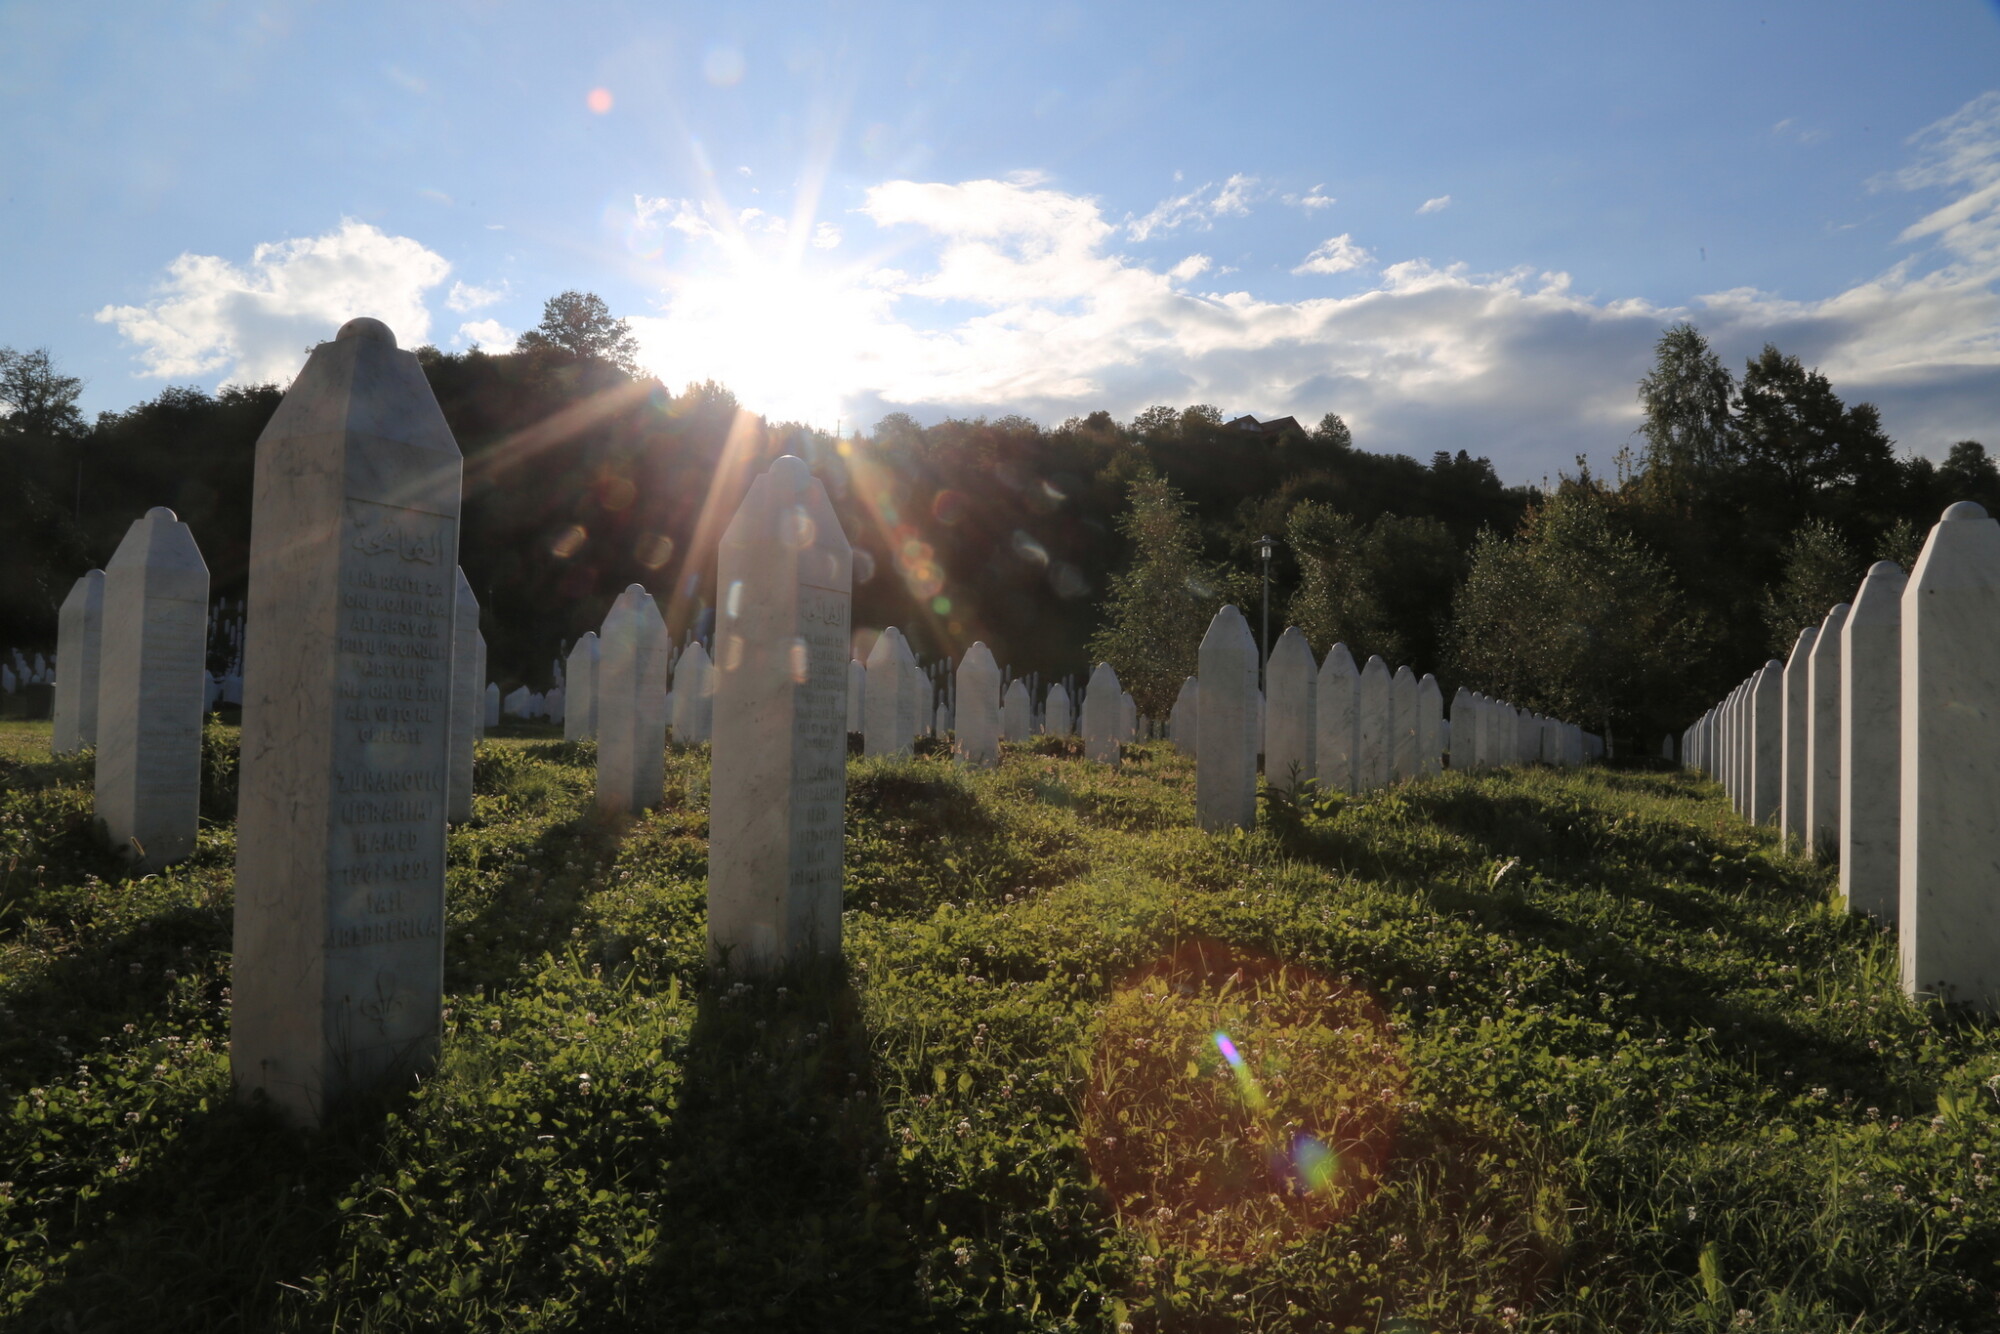 Gravestones of thousands of victims at the Srebrenica genocide memorial